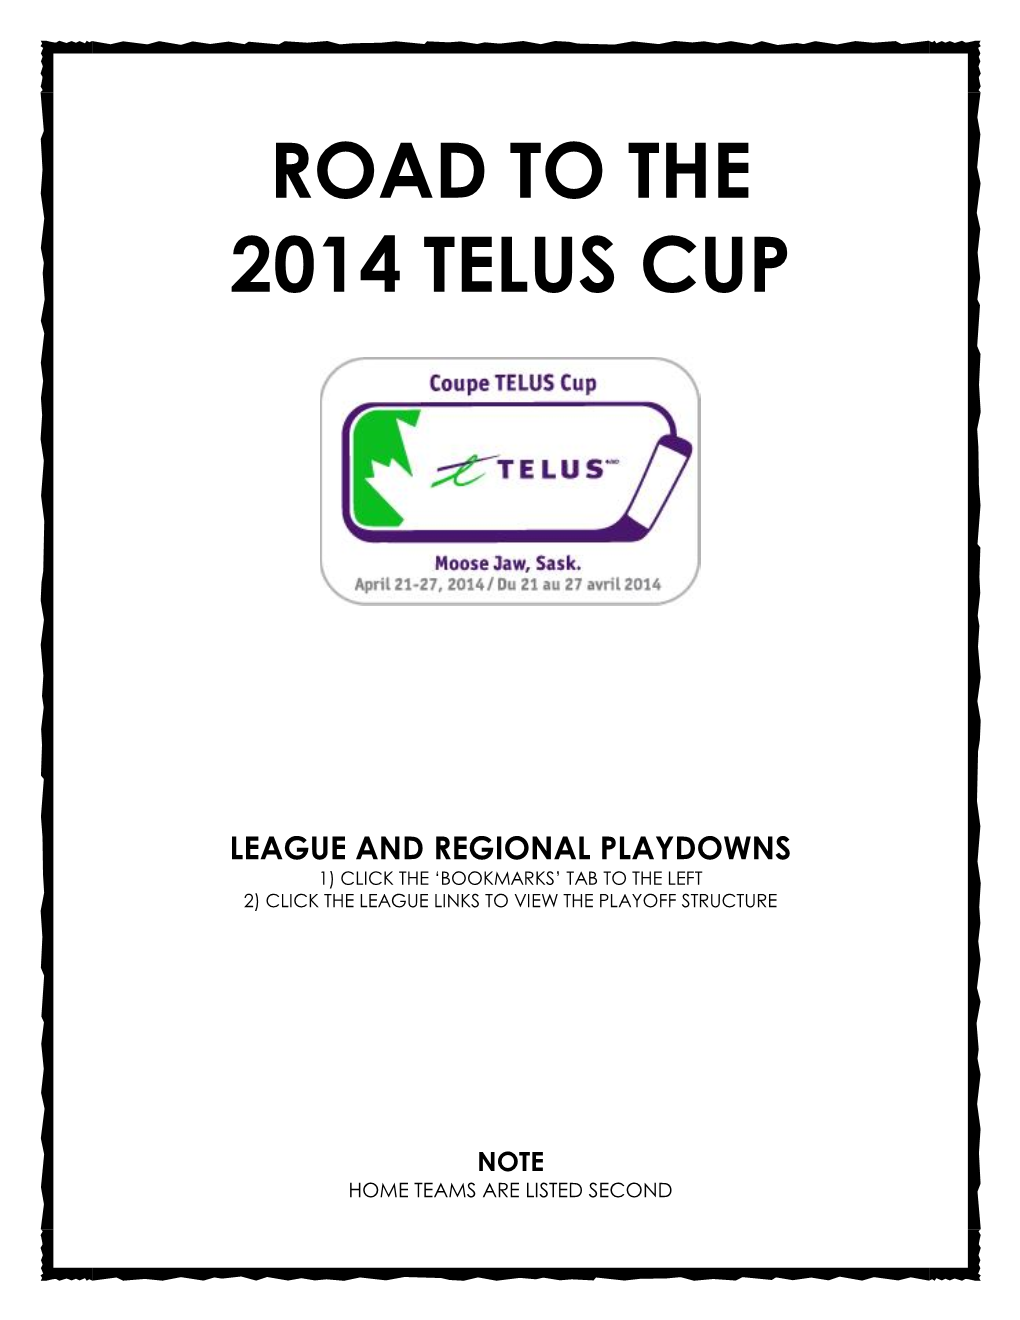 Road to the 2014 Telus Cup